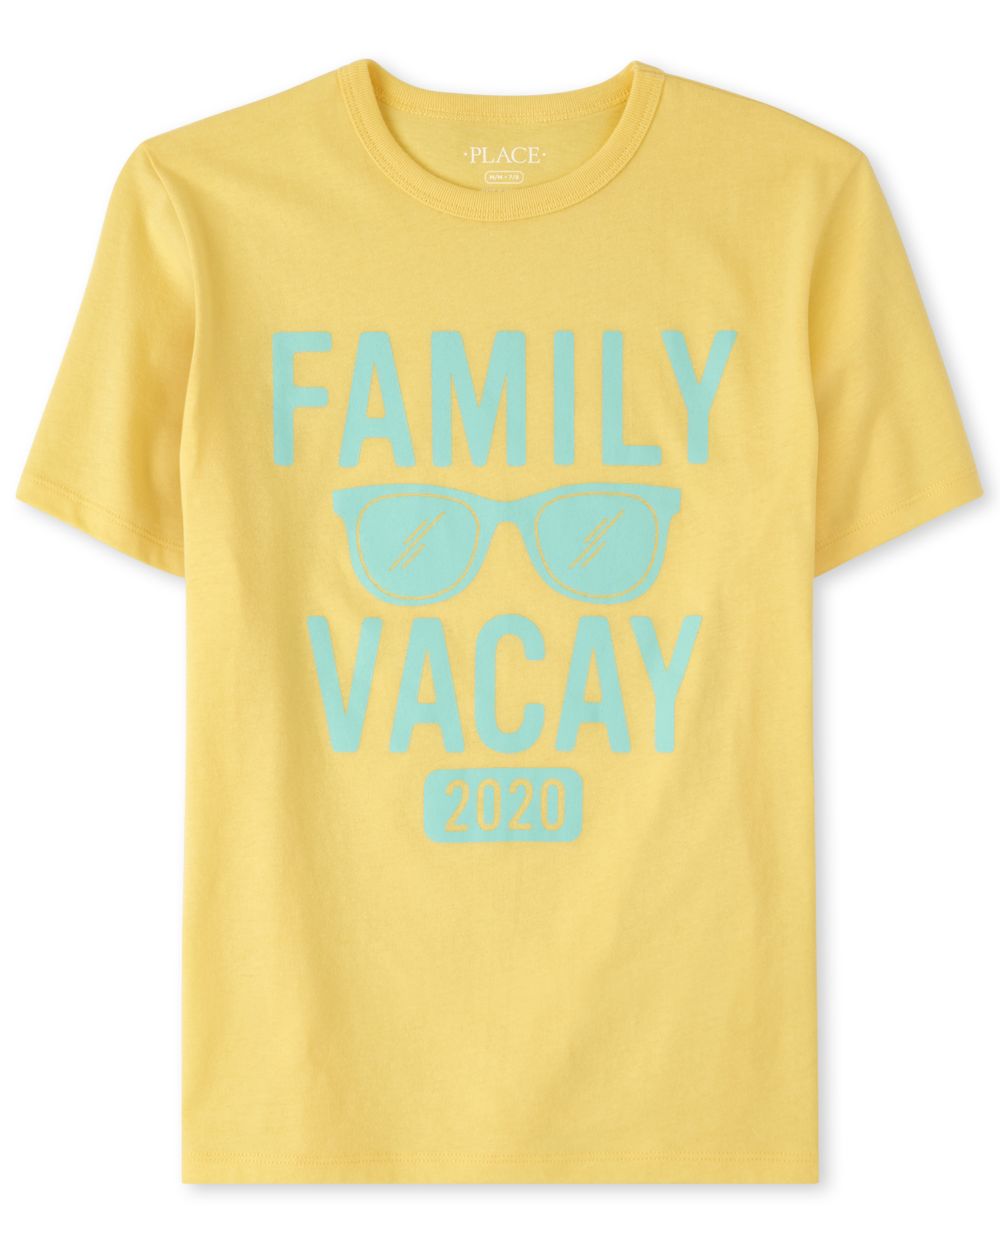 Download Unisex Kids Matching Family Short Sleeve 'Family Vacay ...